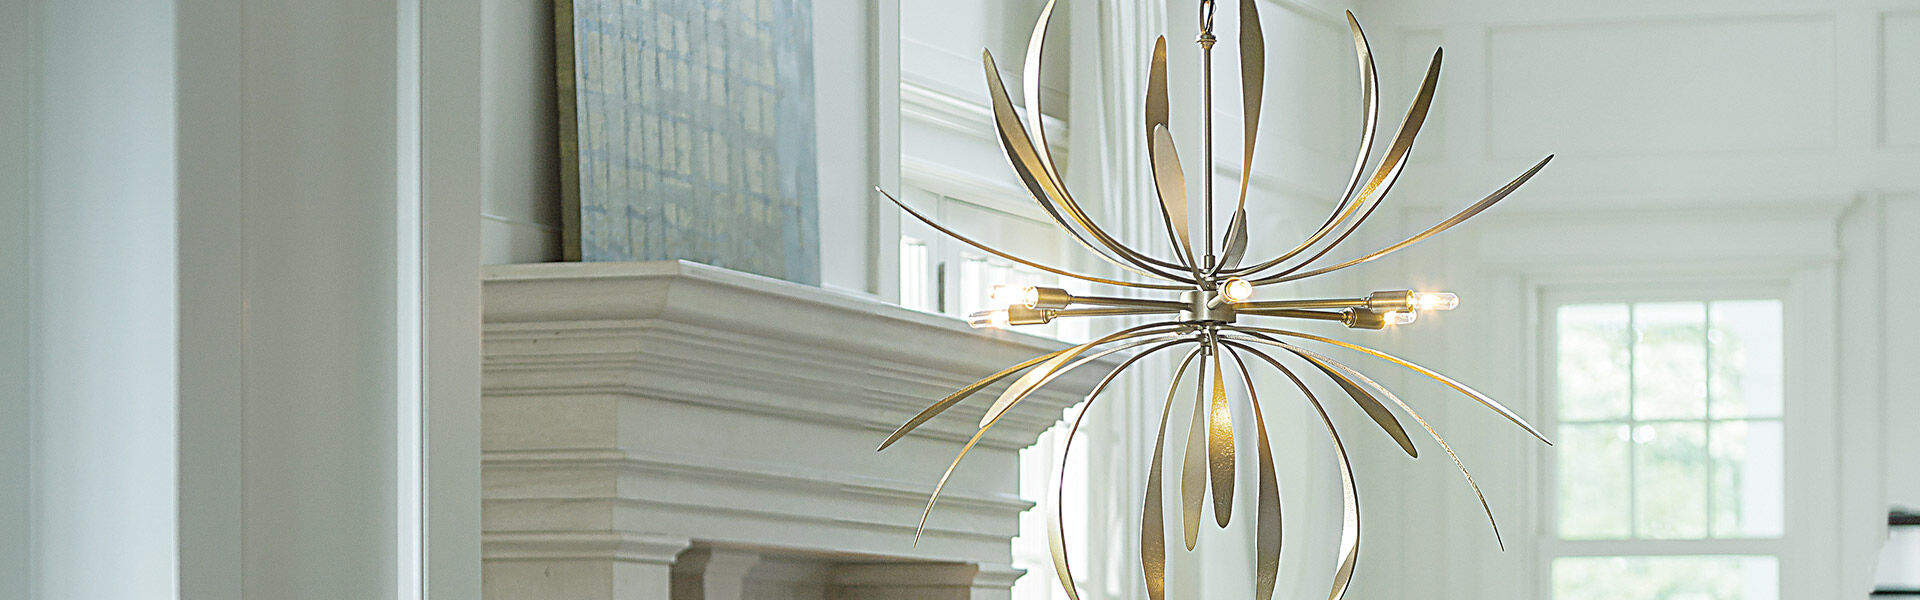 Hubbardton Forge | 20% Off Entire Line | ends 12.4